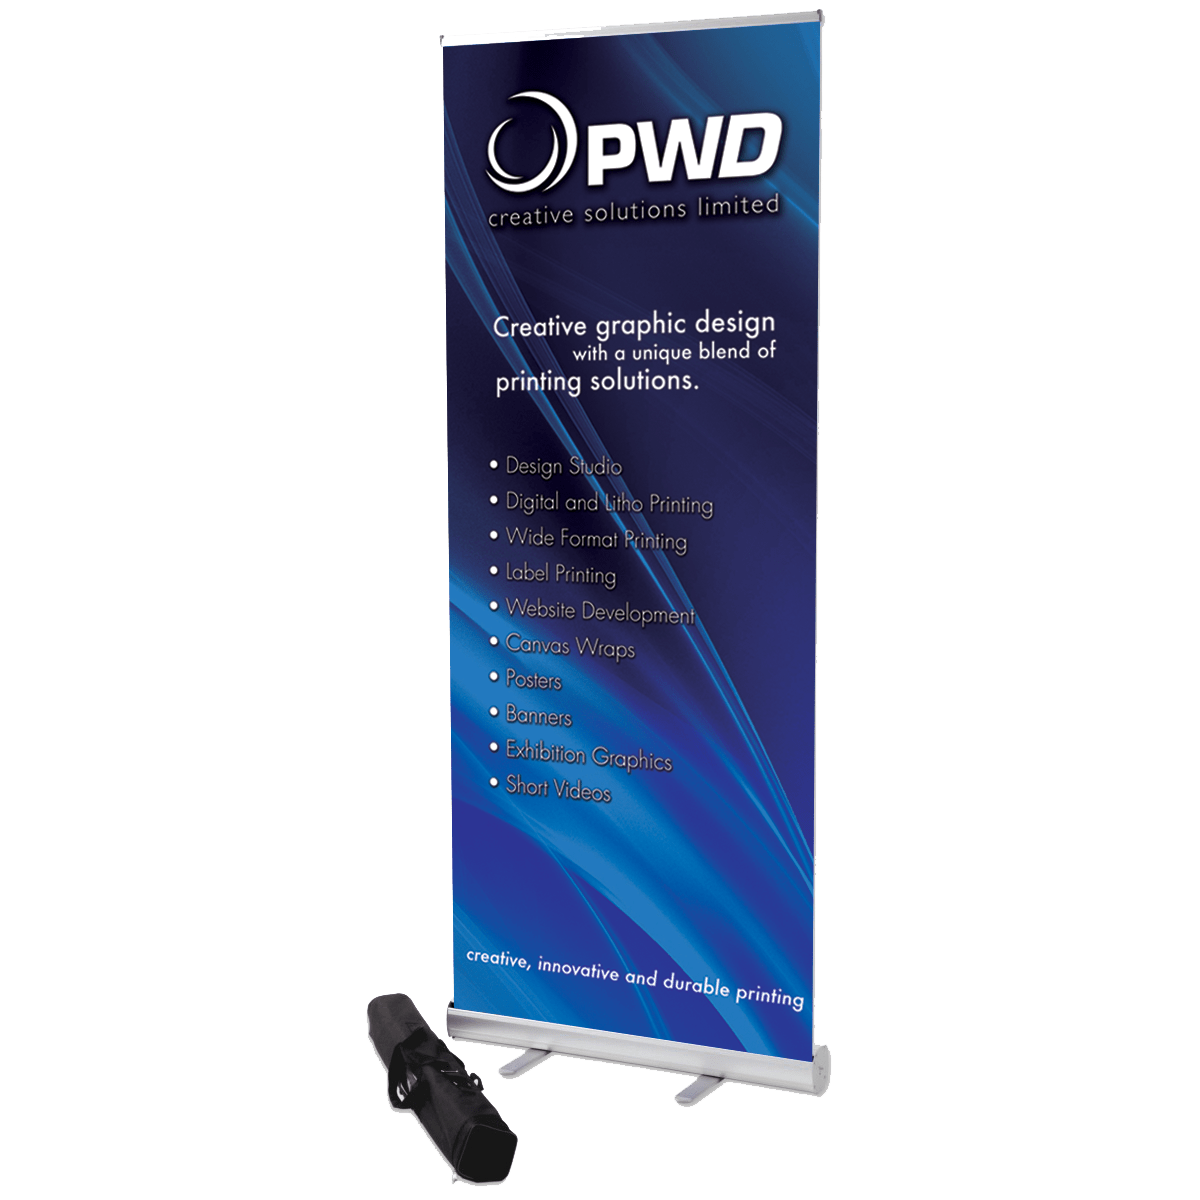 Roller Banners For Events